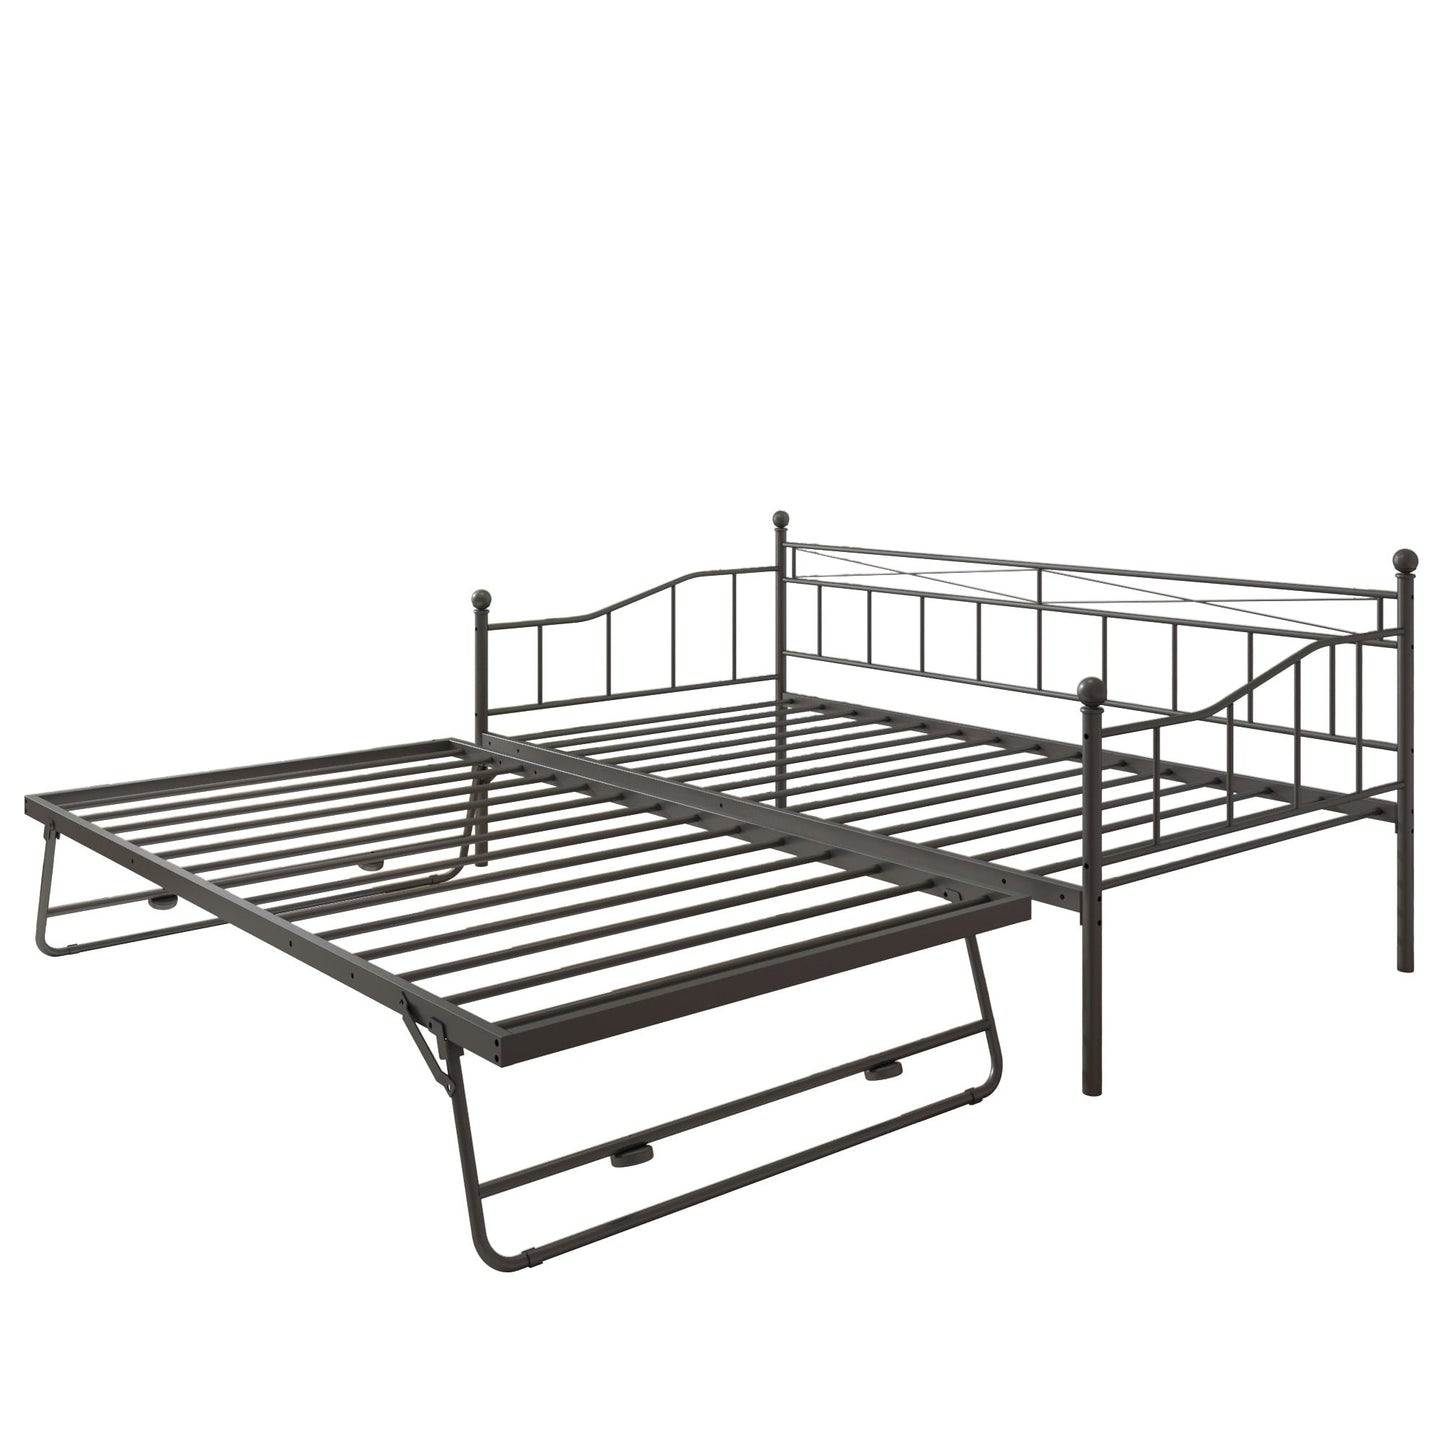 Premium Daybed Metal Bed Frame, Twin Size Bed with Trundle, Daybed and Roll Out Trundle for Kids Room Guest Room Apartment, Easy Assembly, Mattresses Sold Separately